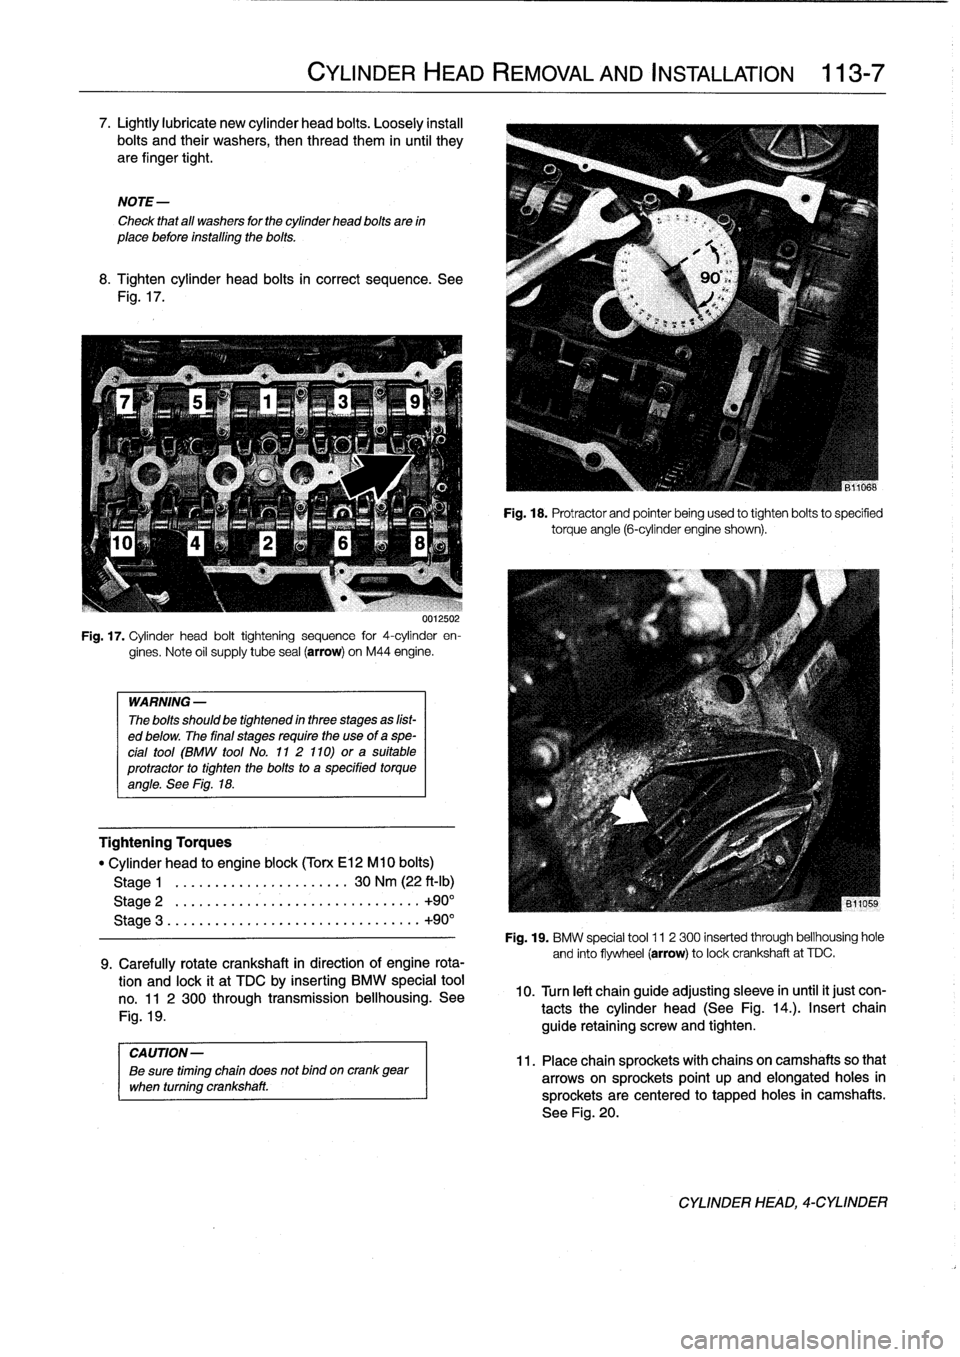 BMW 318i 1995 E36 Workshop Manual 
7
.
Lightly
lubricate
new
cylinder
head
bolts
.
Loosely
instan
bolts
and
their
washers,
then
thread
them
in
until
they
are
finger
tight
.

NOTE-

Check
that
all
washers
for
the
cylinder
head
bolts
ar